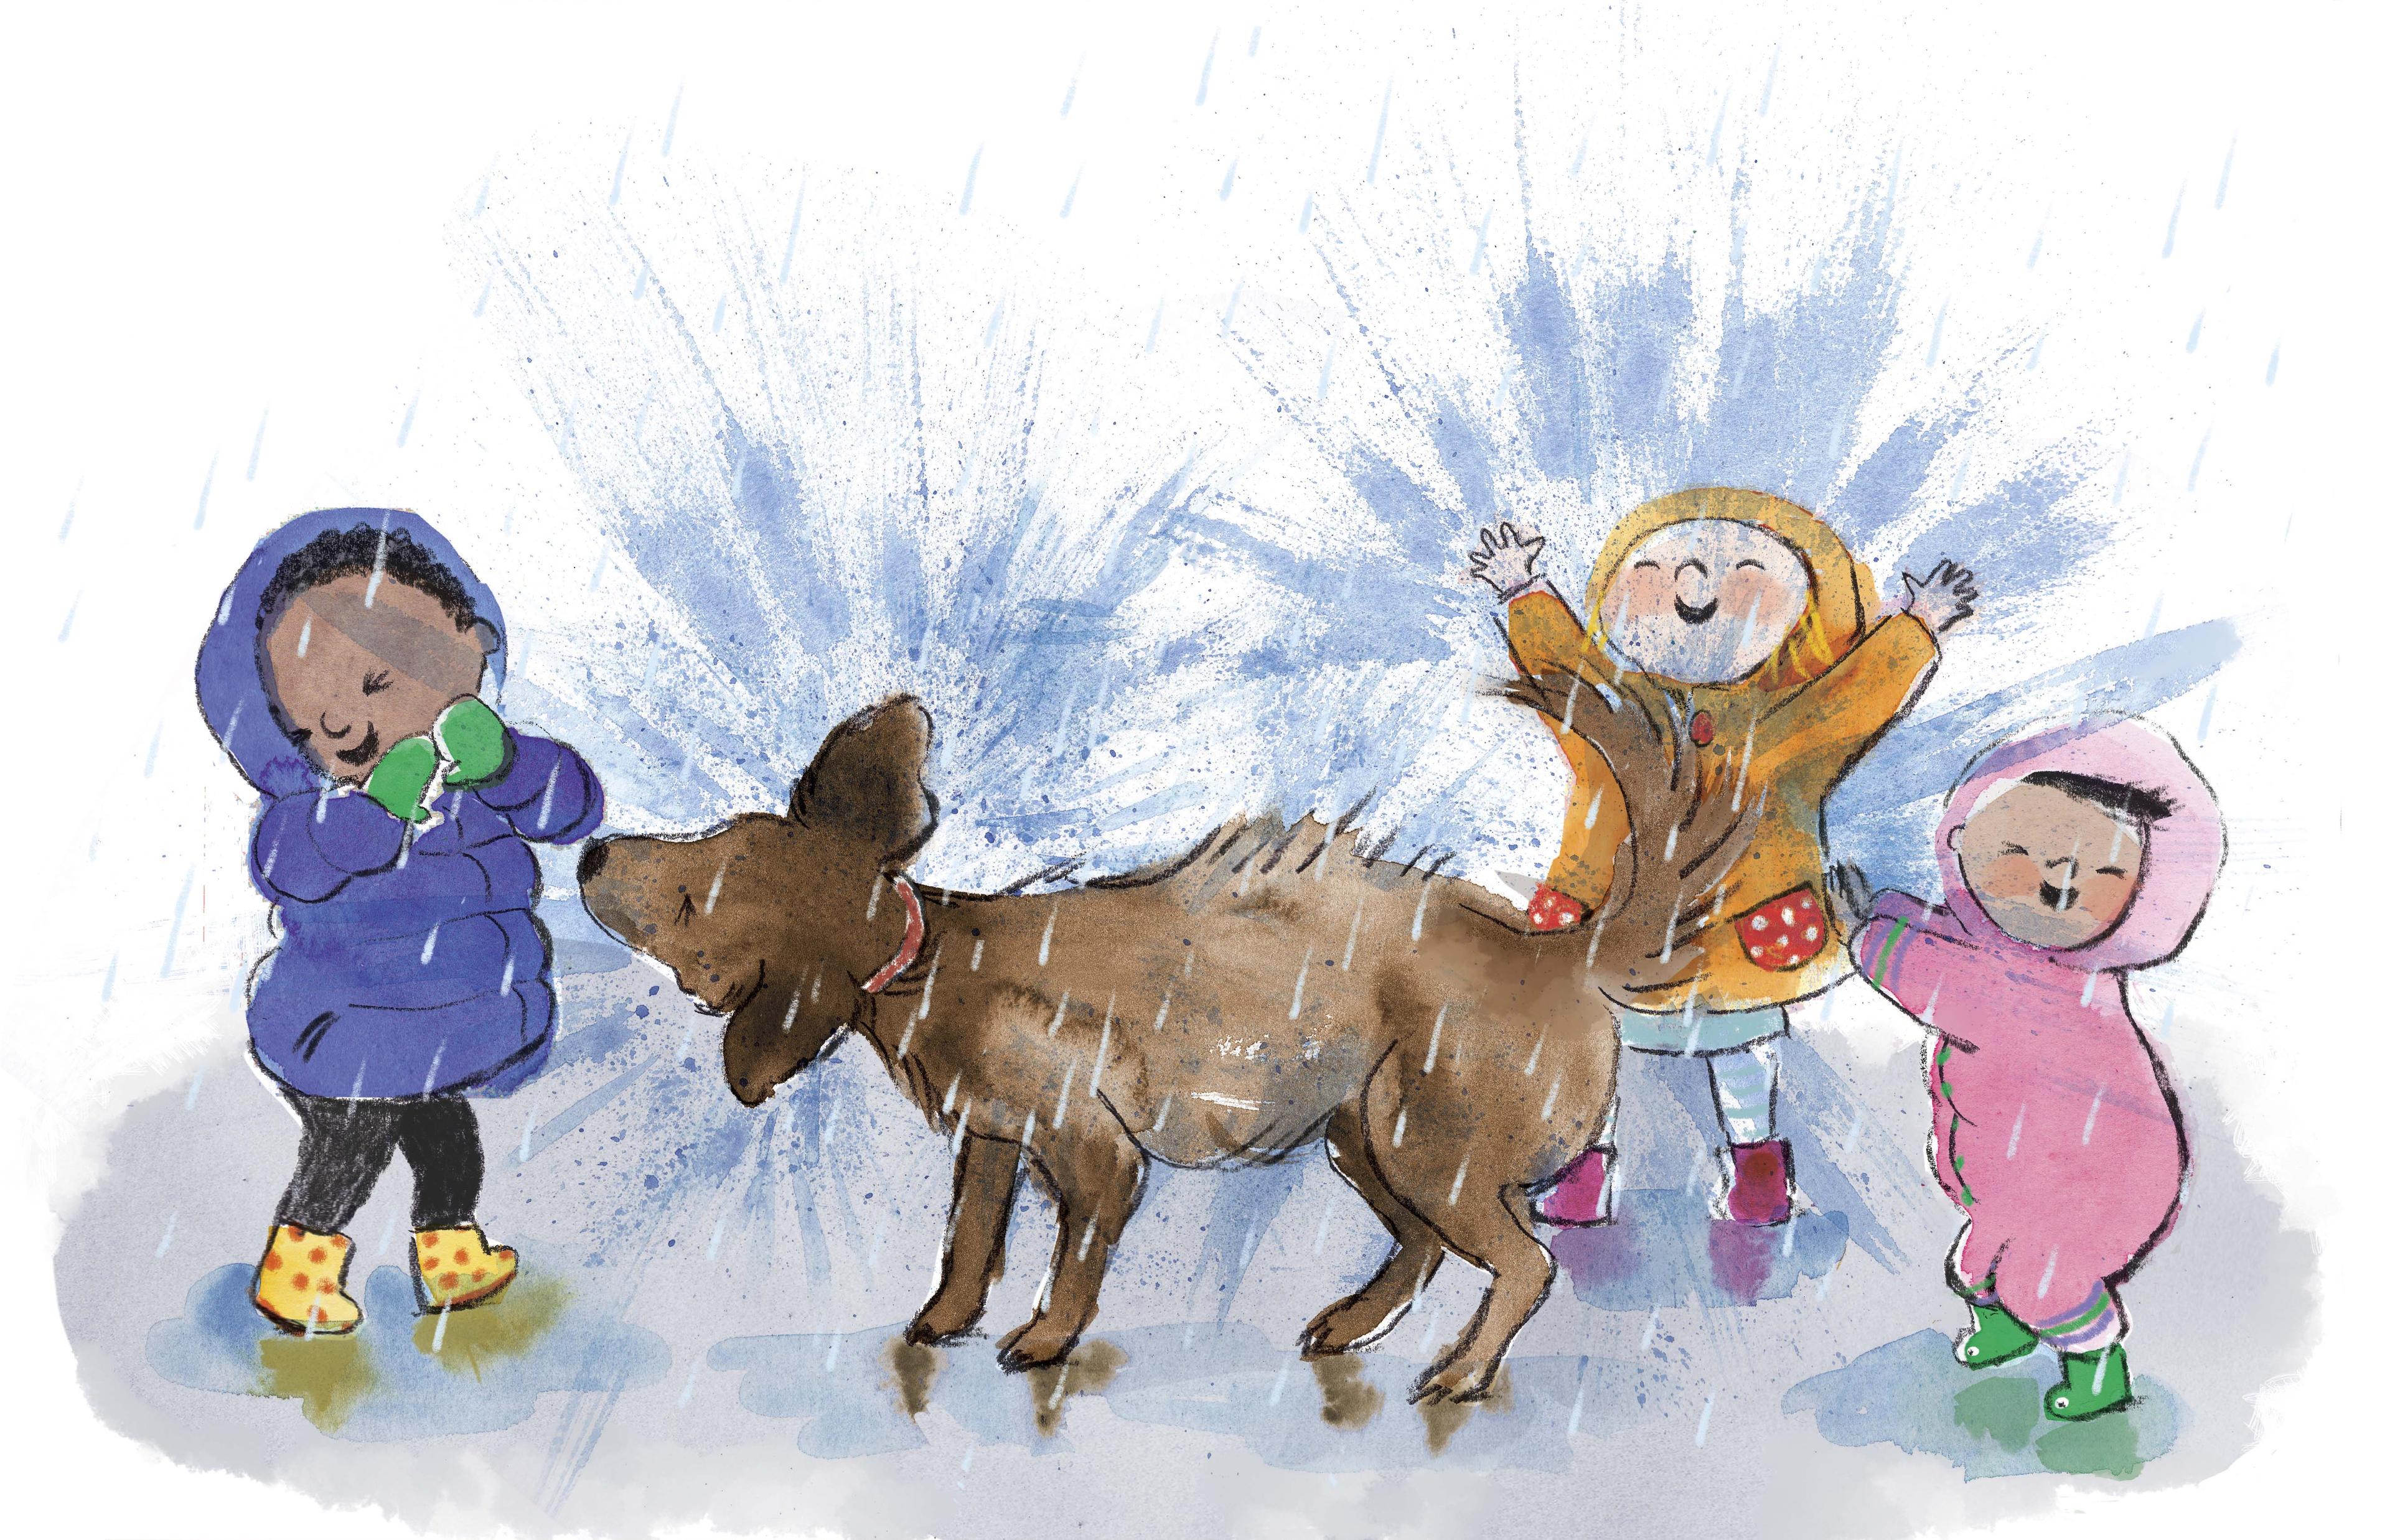 An illustration of three children splashing in puddles with a dog.